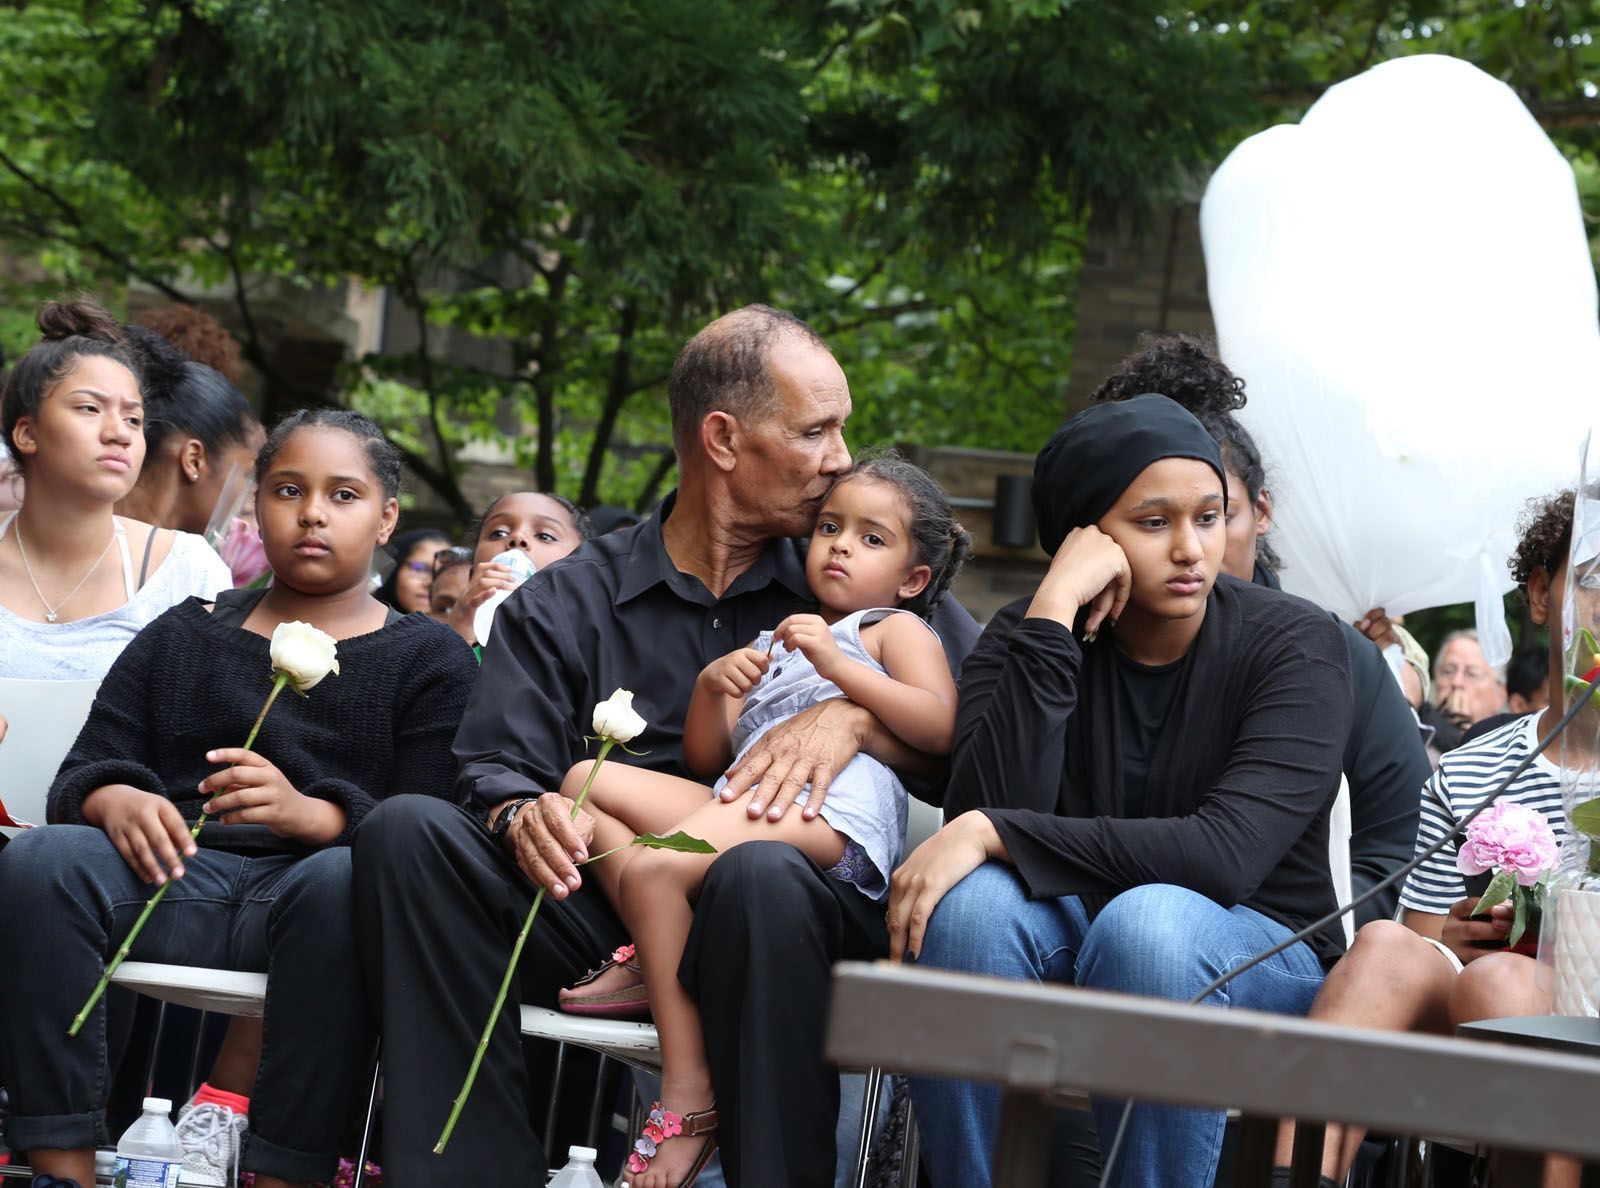 Nabra Hassanen's family looks on at a vigil in honor of Nabra on Wednesday, June 21, 2017, in Reston, Va. (WTOP/Omama Altaleb)